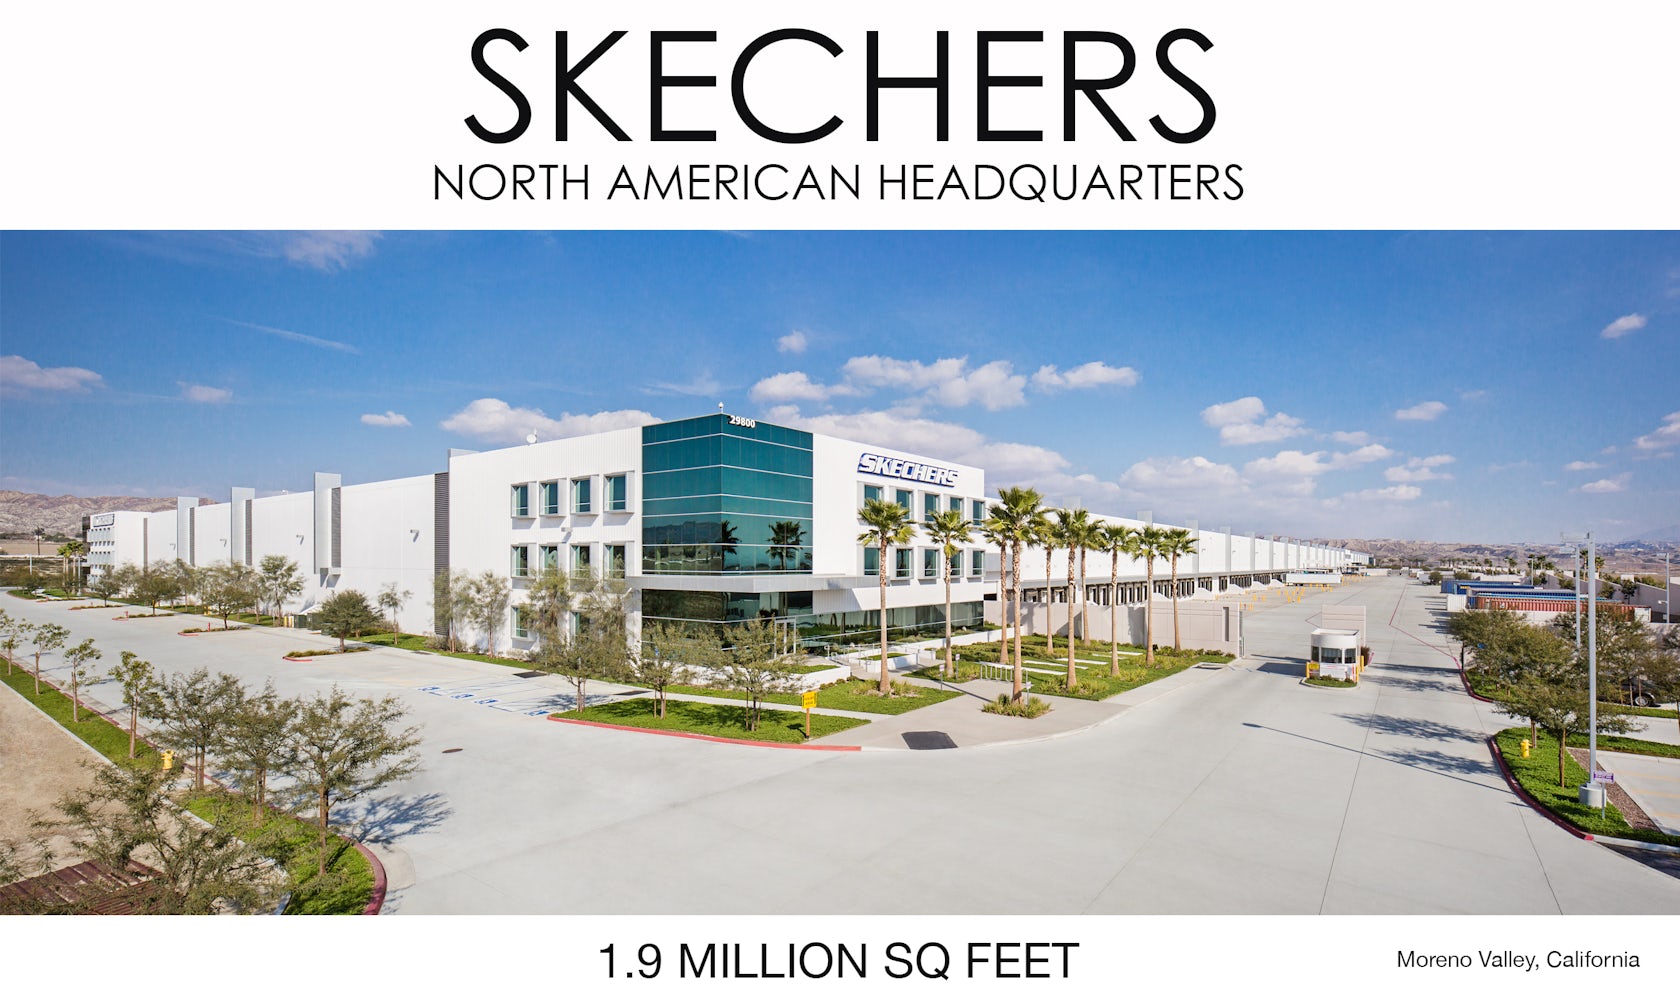 Skechers by Chad Mellon Photographer - Architizer